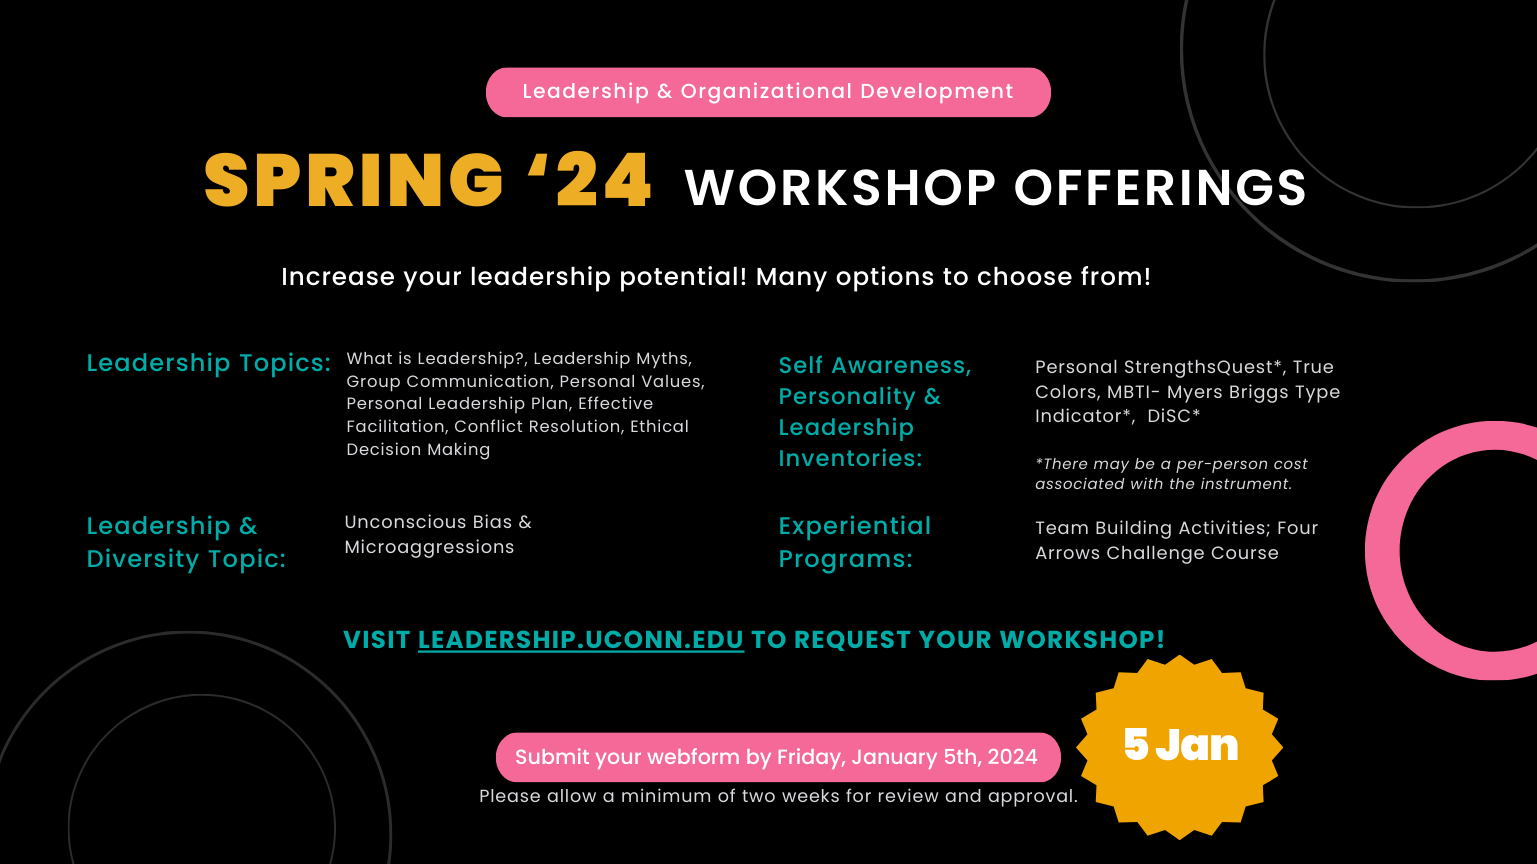 Flyer for Leadership & Organizational Development's Spring 2024 workshop offerings. Flyer reads: Increase your leadership potential! Many options to choose from. Workshop offerings include: General leadership topics such as What is Leadership?, Leadership Myths, Group Communication, Personal Values, Personal Leadership Plans, Effective Facilitation, Conflict Resolution, and Ethical Decision Making. Leadership and Diversity topics such as Unconscious Bias and Microaggressions. Self-Awareness, Personality and Leadership Inventories topics include: Personal StrengthsQuest, True Colors, MBTI (Myers Briggs Type Indicator), and DiSC. For these topics there may be a per-person cost associated with the instrument. Experiential Programs are also available through Four Arrows Challenge Course. Submit your webform by Friday, January 5, 2024. Please allow a minimum of two weeks for review and approval.